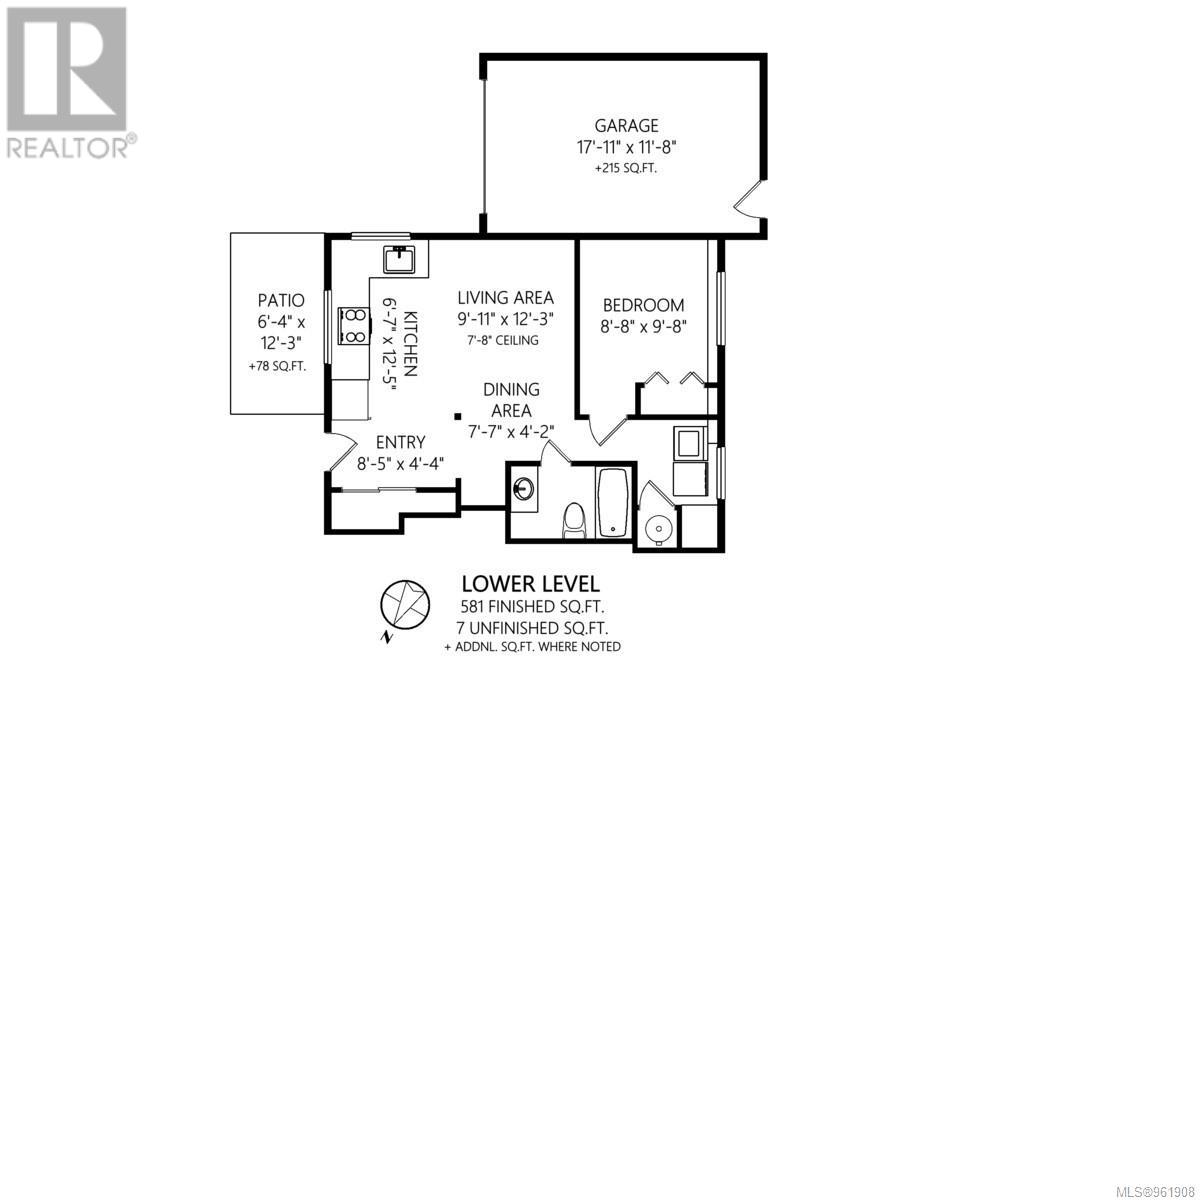  9559 Lapwing Place, Sidney